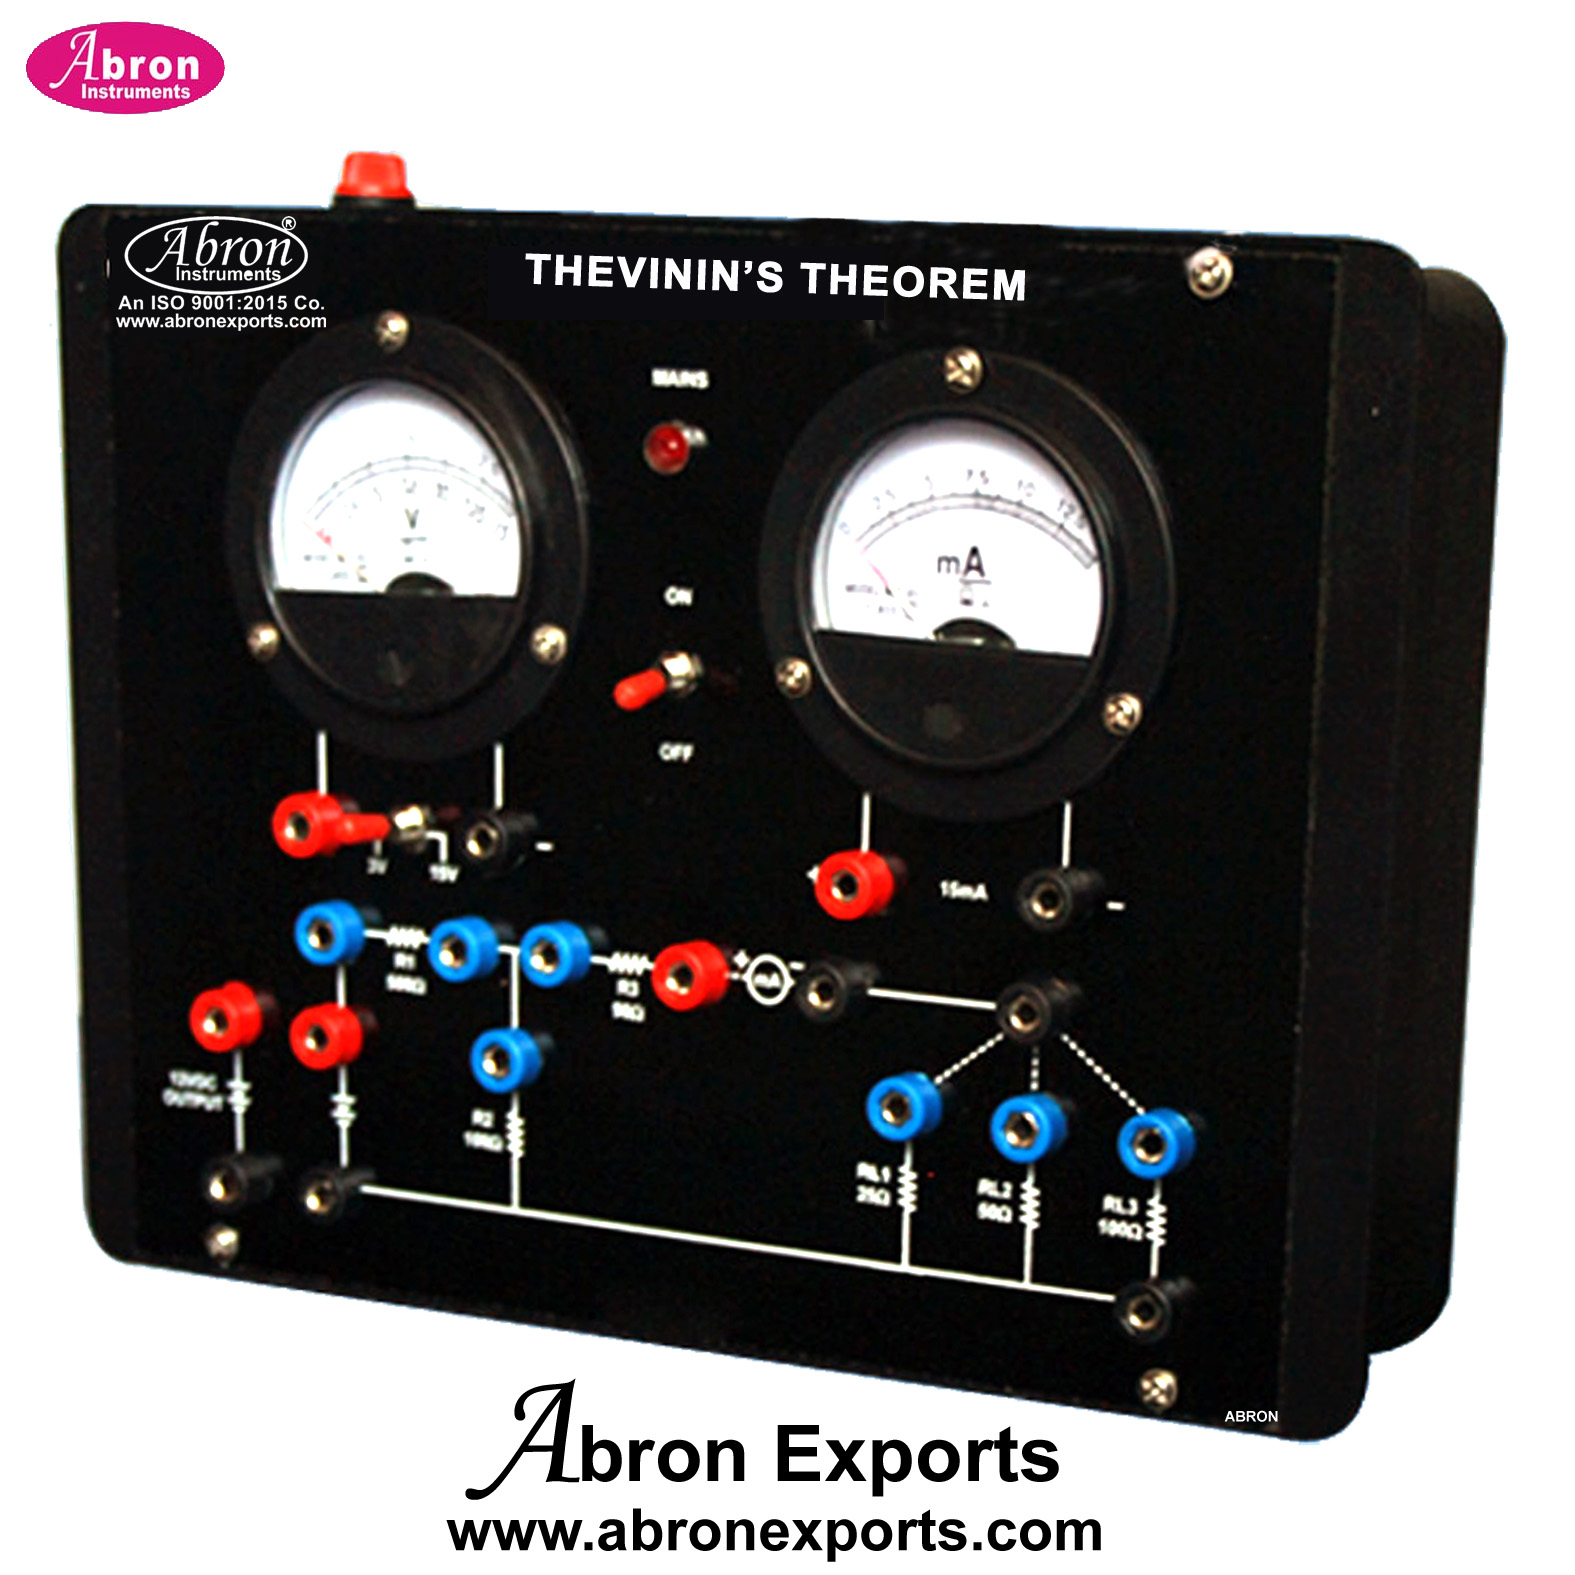 Study Theorem Thevenins Theorem With Power Supply 2 meters Electronic Trainer Kit Abron AE-1430TH 